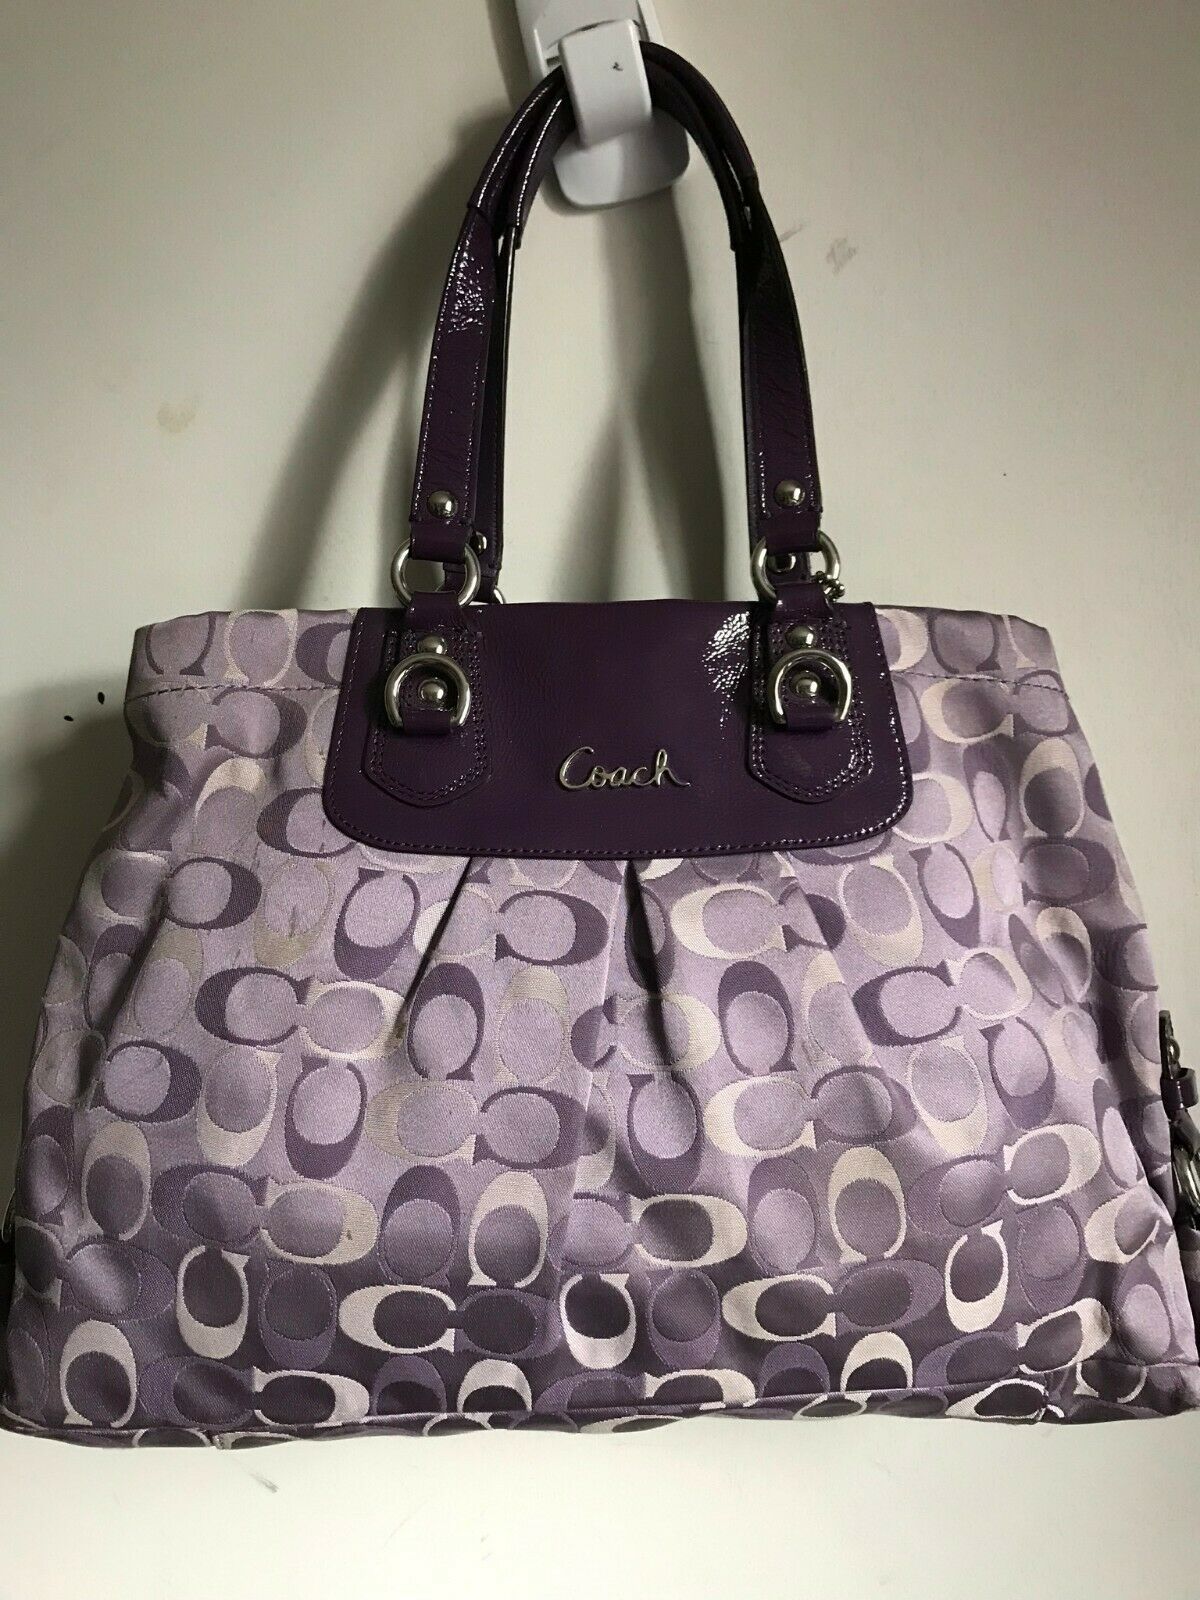 Coach Purse Purple - $239 (44% Off Retail) New With Tags - From Sarah